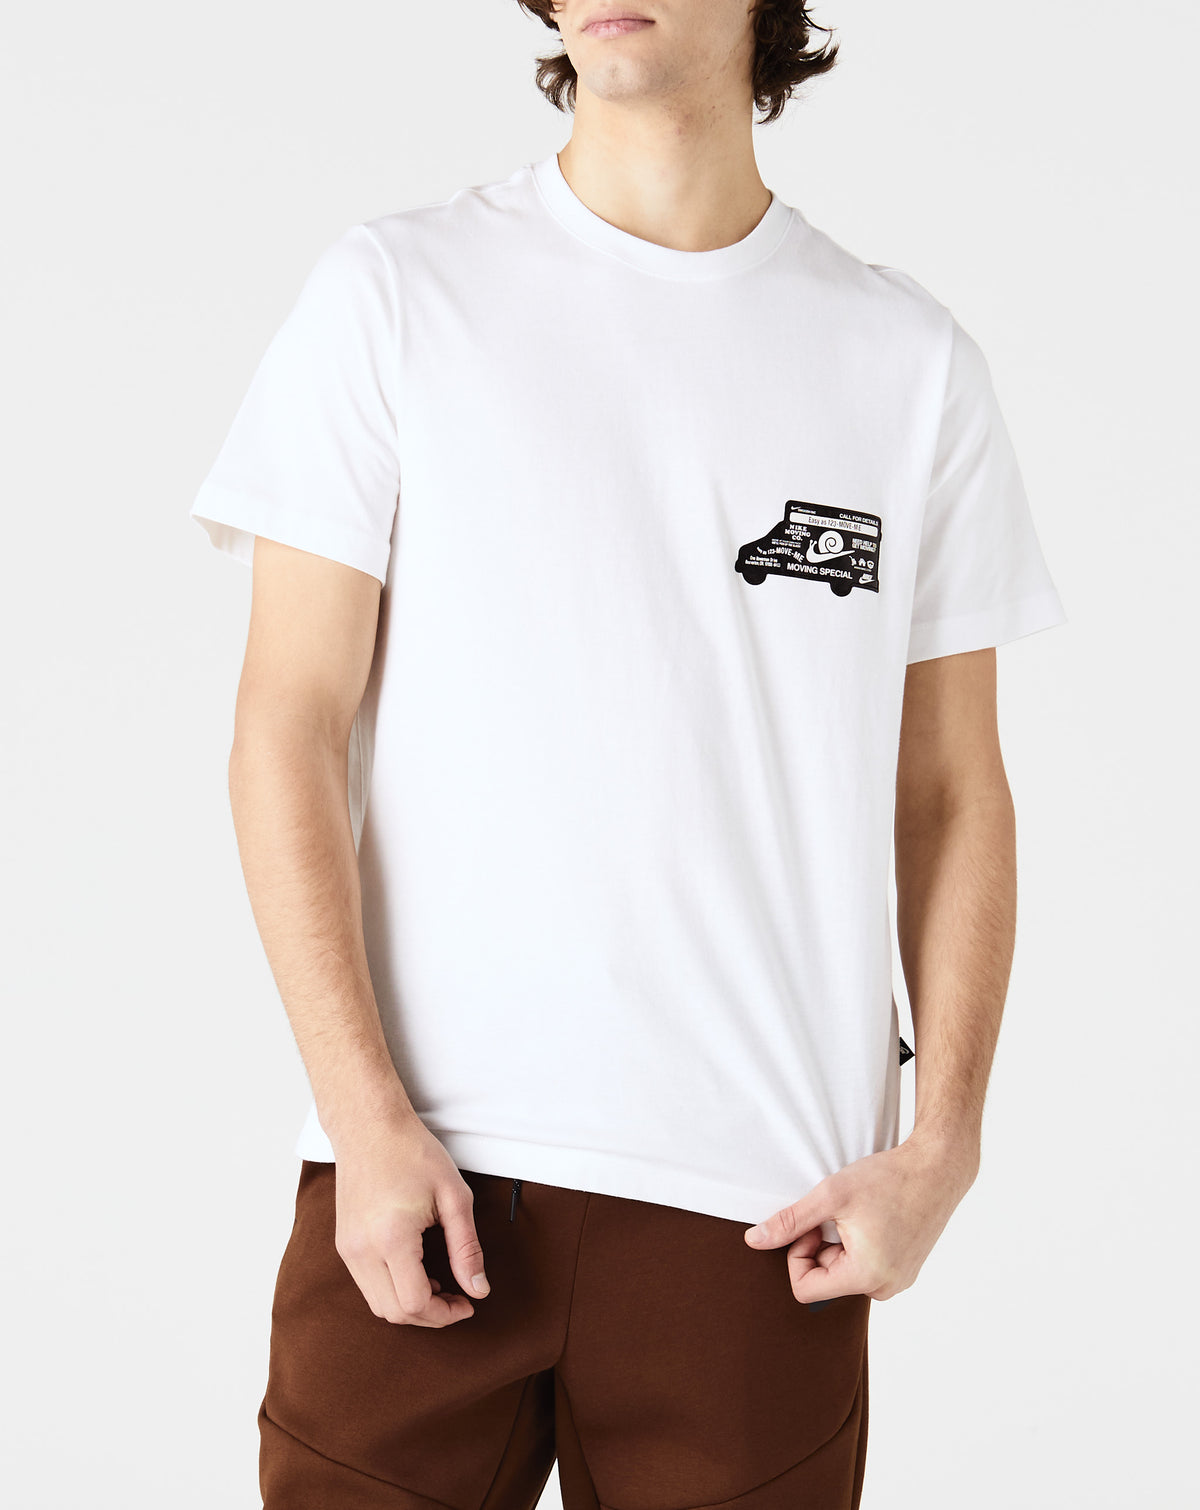 Nike Nike Moving Truck T-Shirt - Rule of Next Apparel